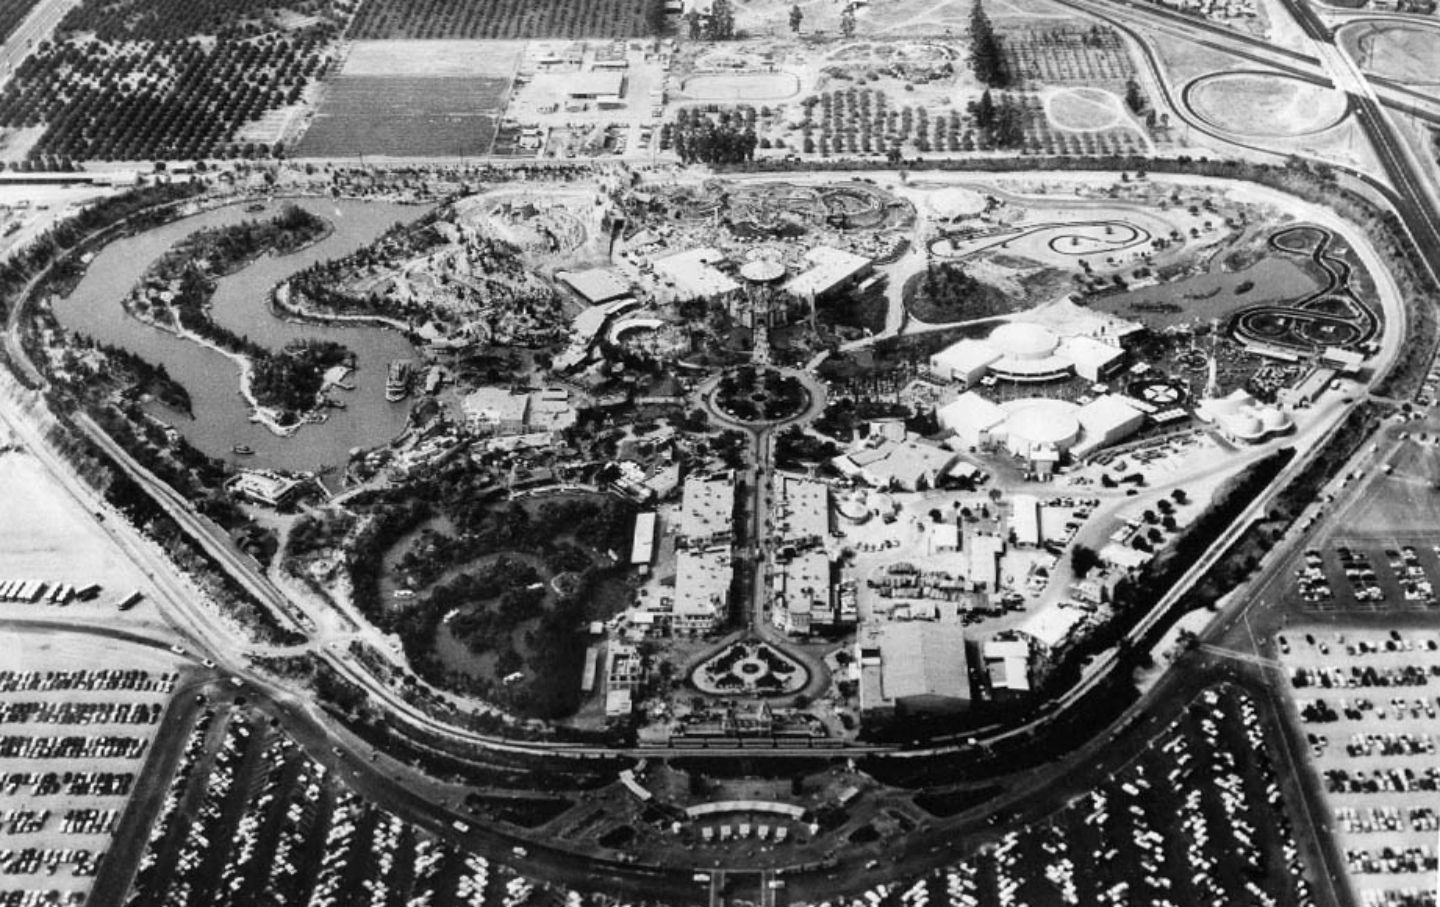 July 17, 1955: Disneyland Opens in Southern California